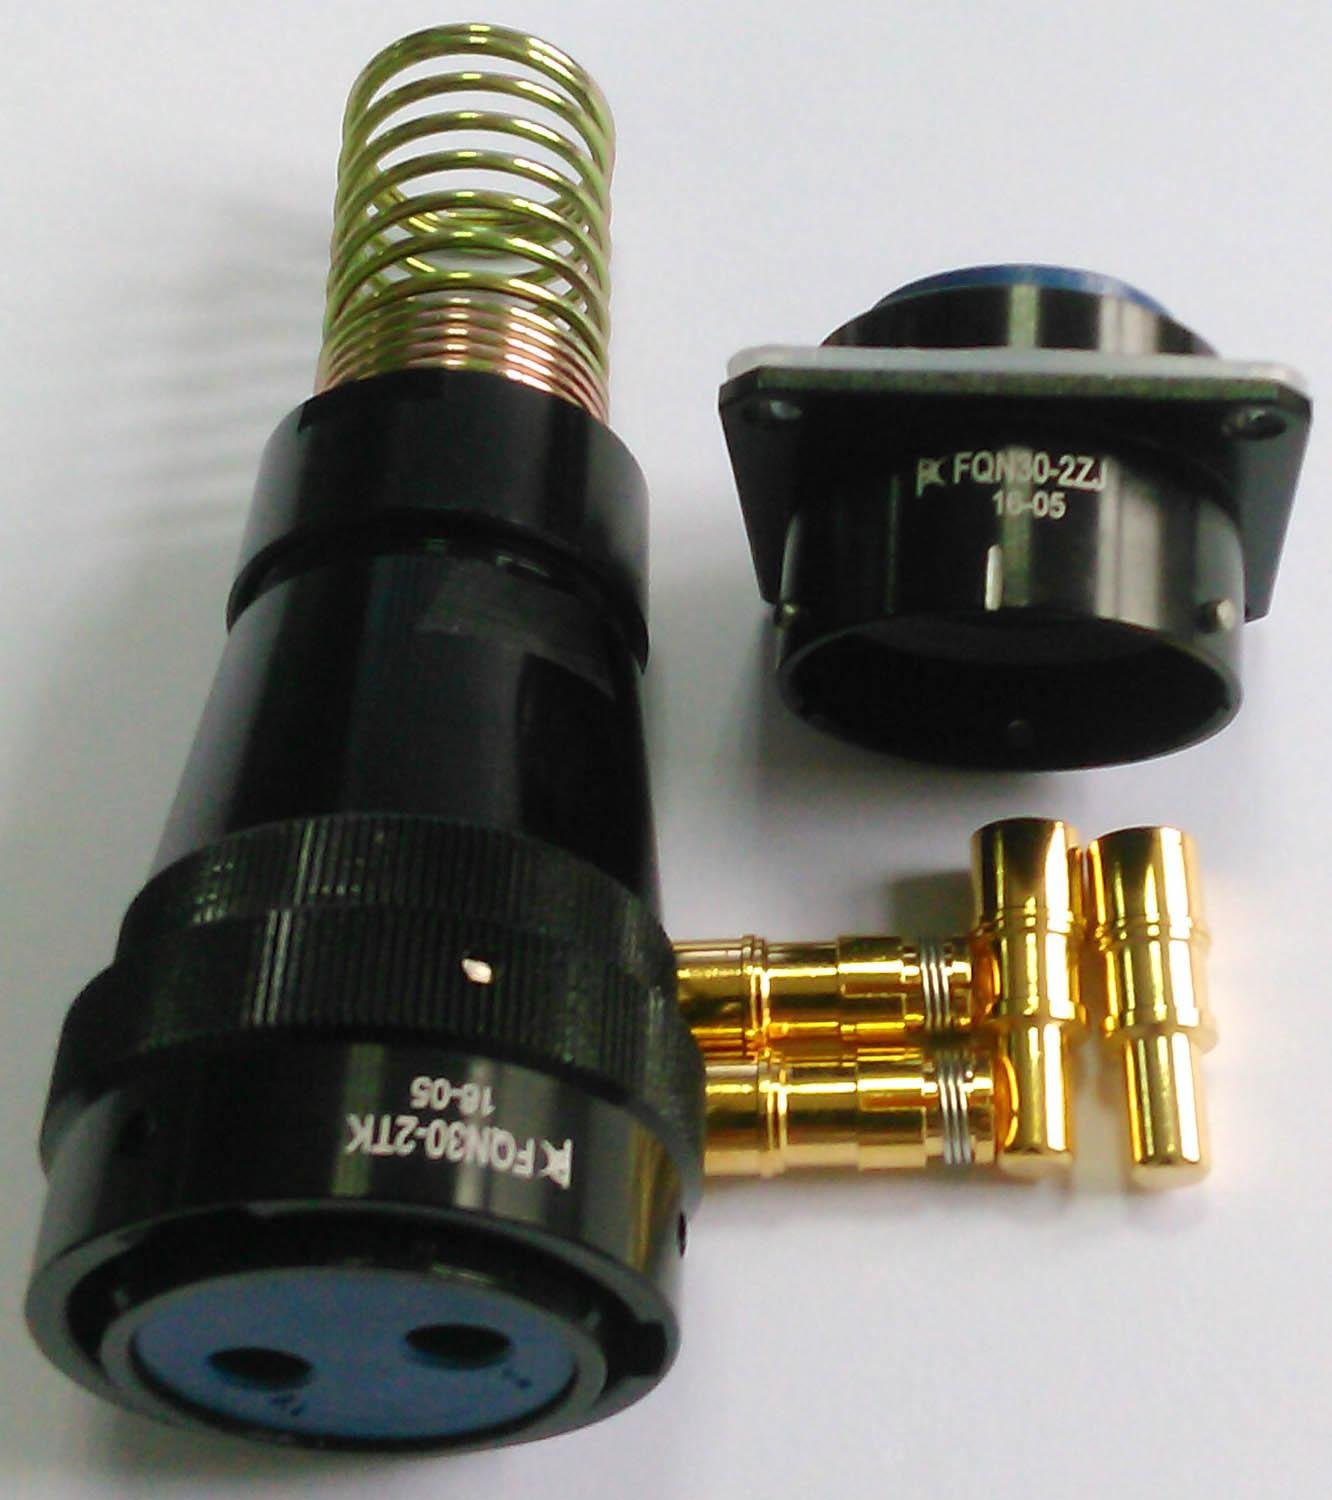 FQN series bayonet connecting water tight connectors 4